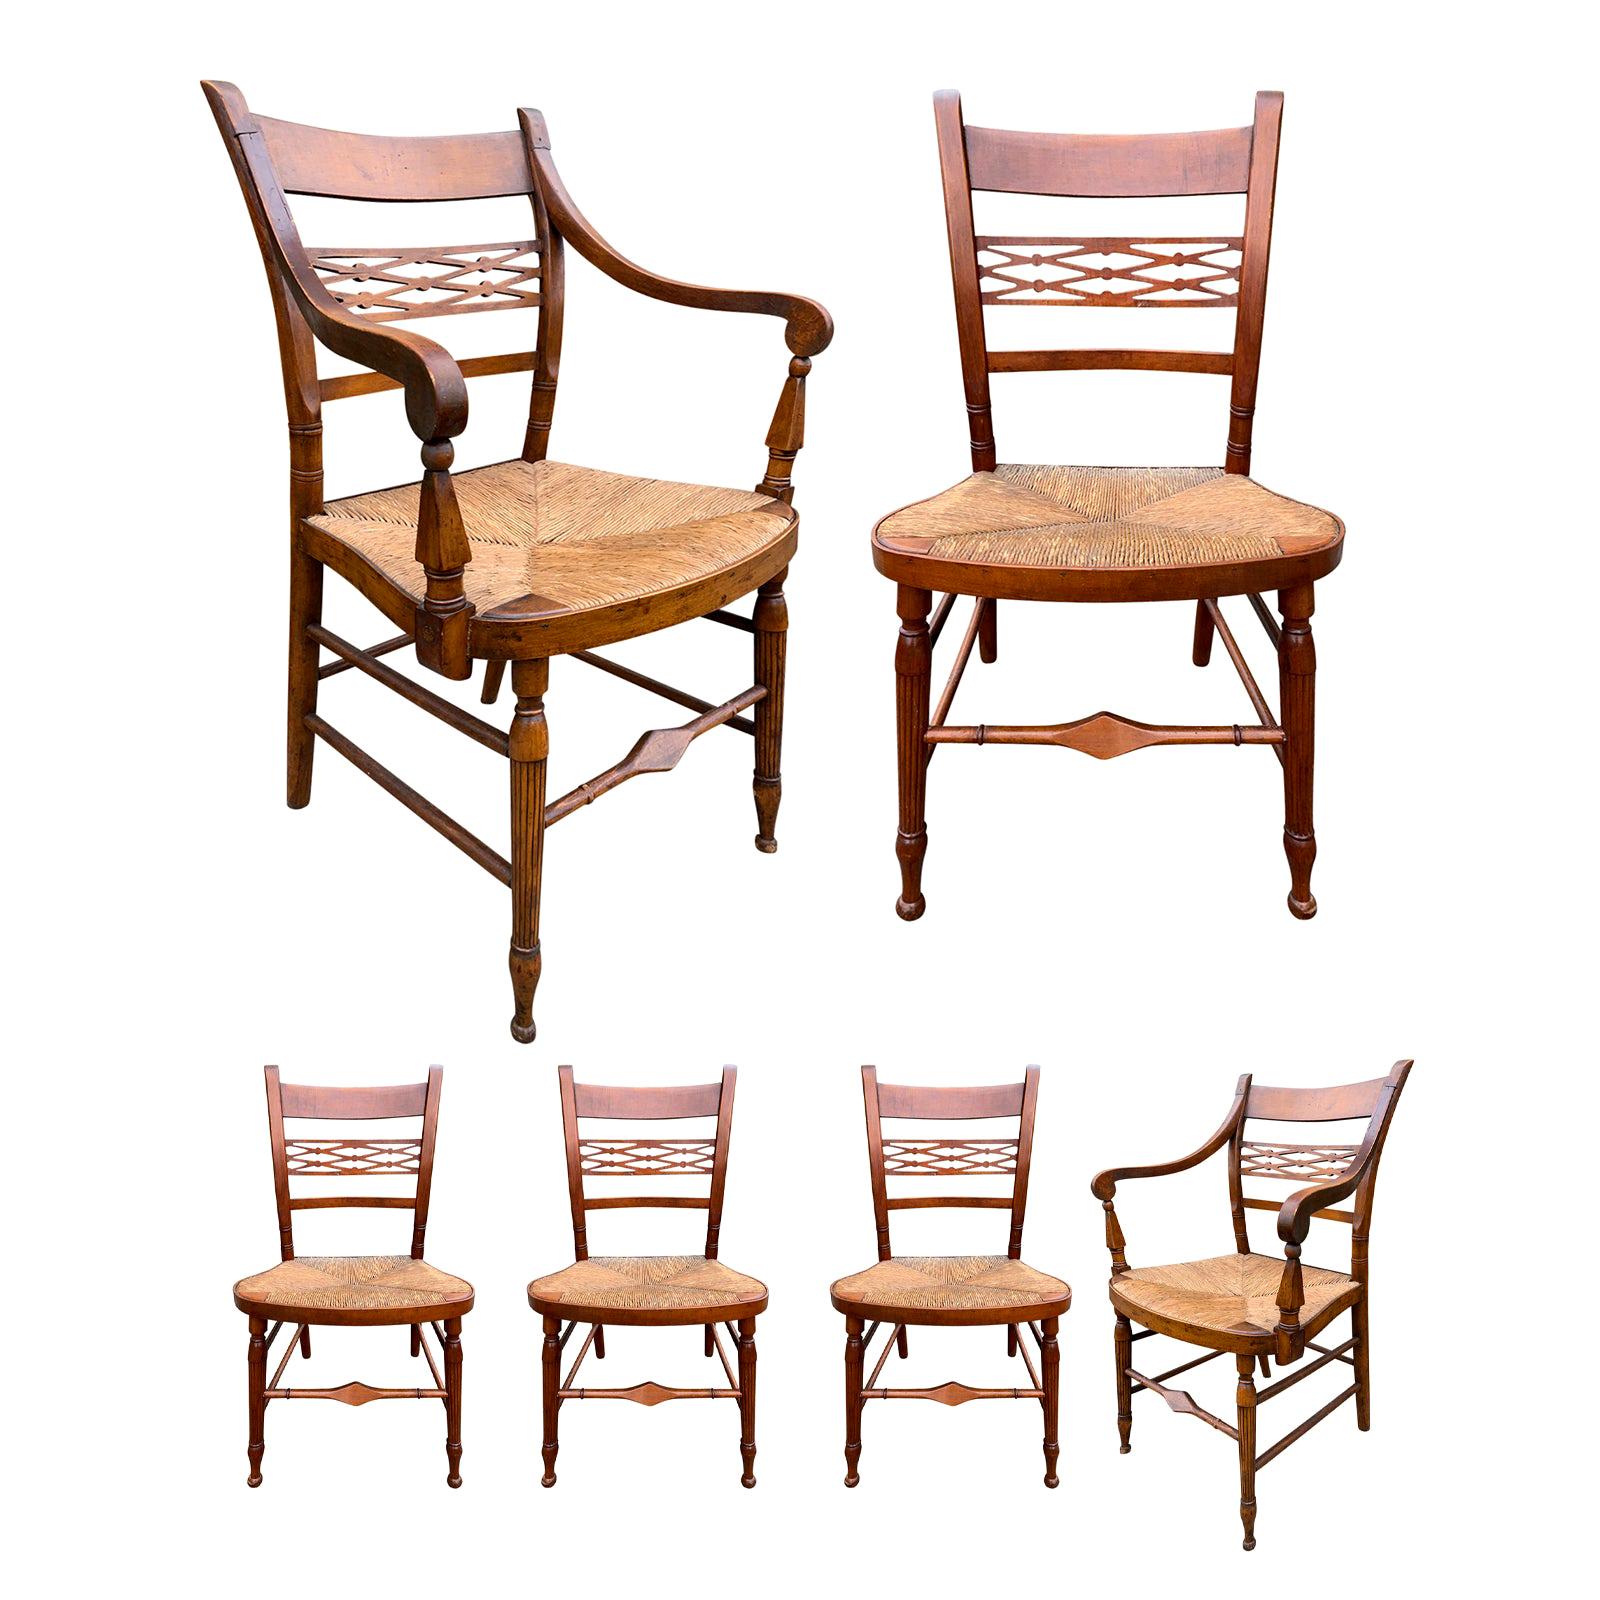 Set of Six 19th Century American Sheraton Maple Chairs with Rush Seats